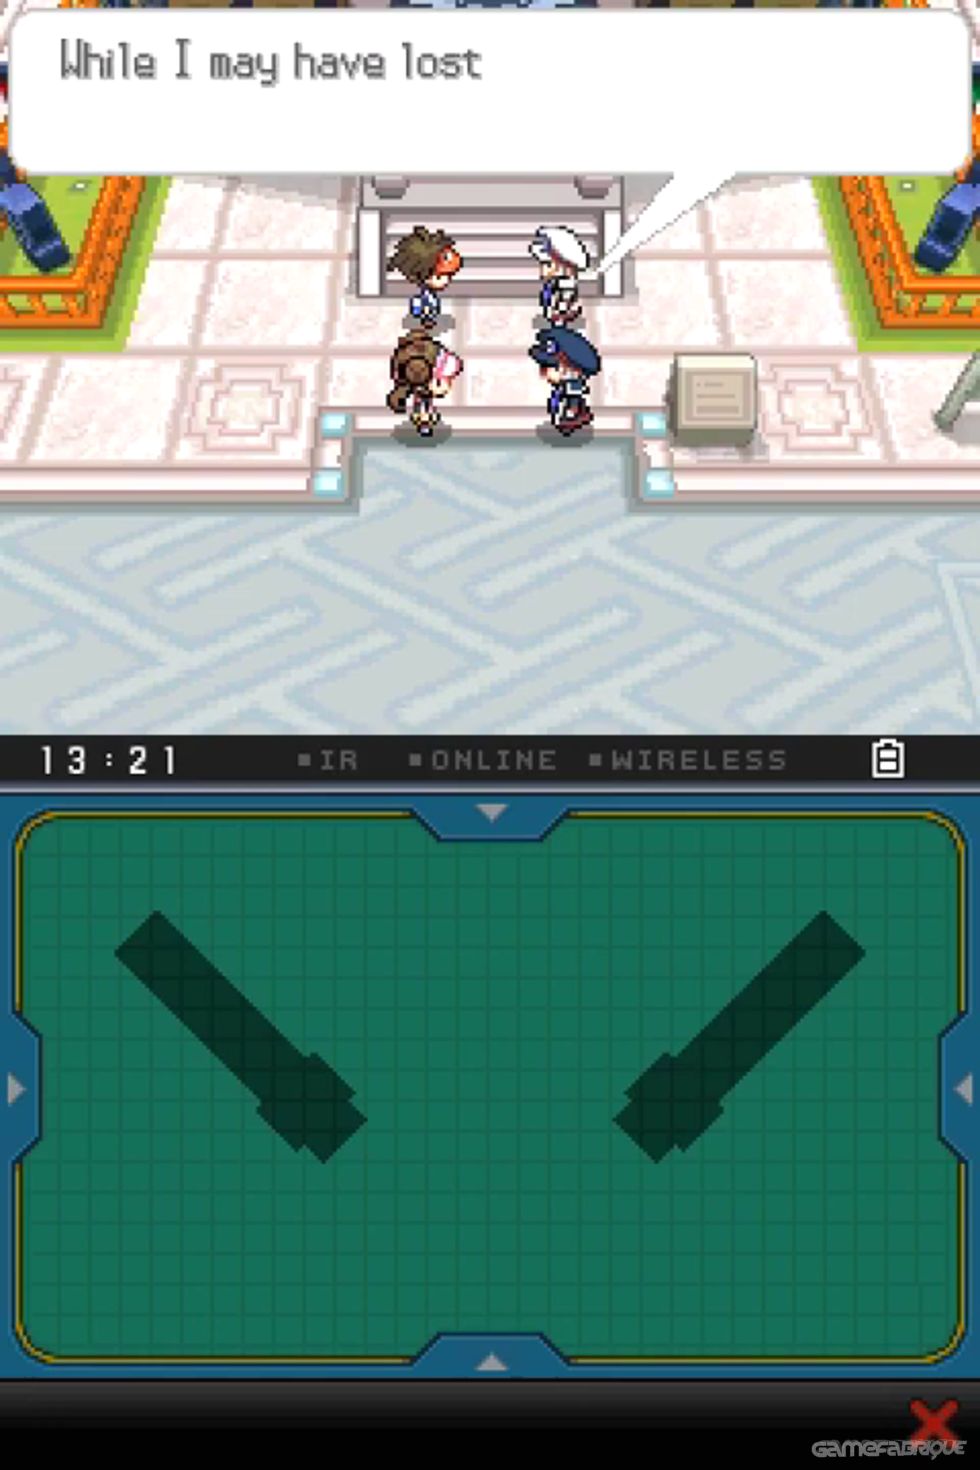 Pokemon Black Version - ds - Walkthrough and Guide - Page 508 - GameSpy